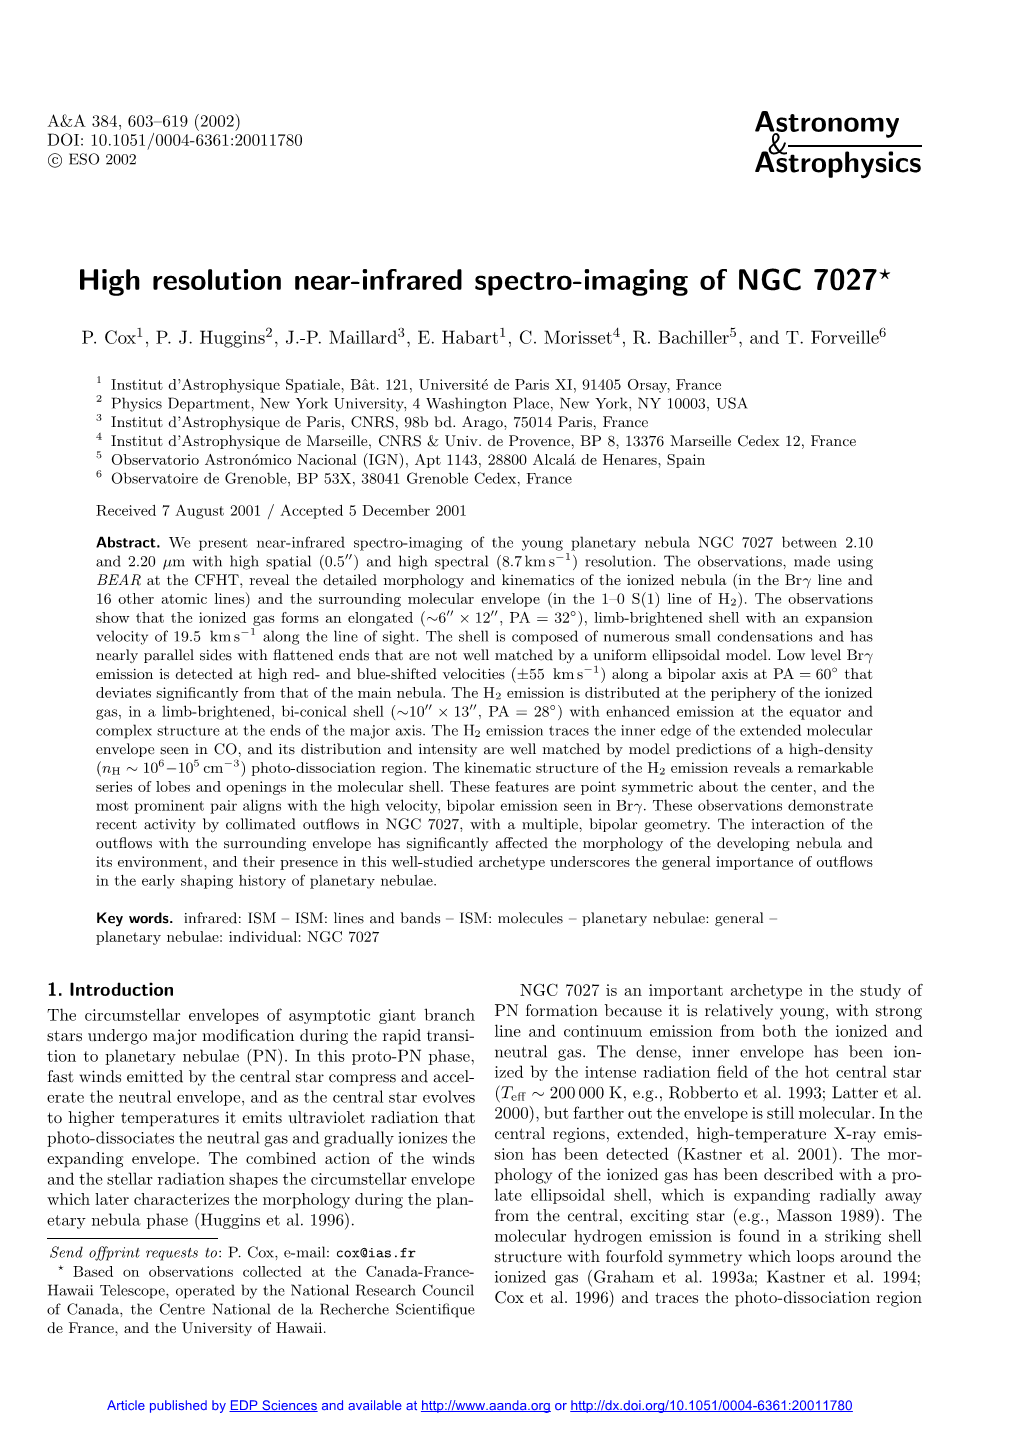 High Resolution Near-Infrared Spectro-Imaging of NGC 7027?